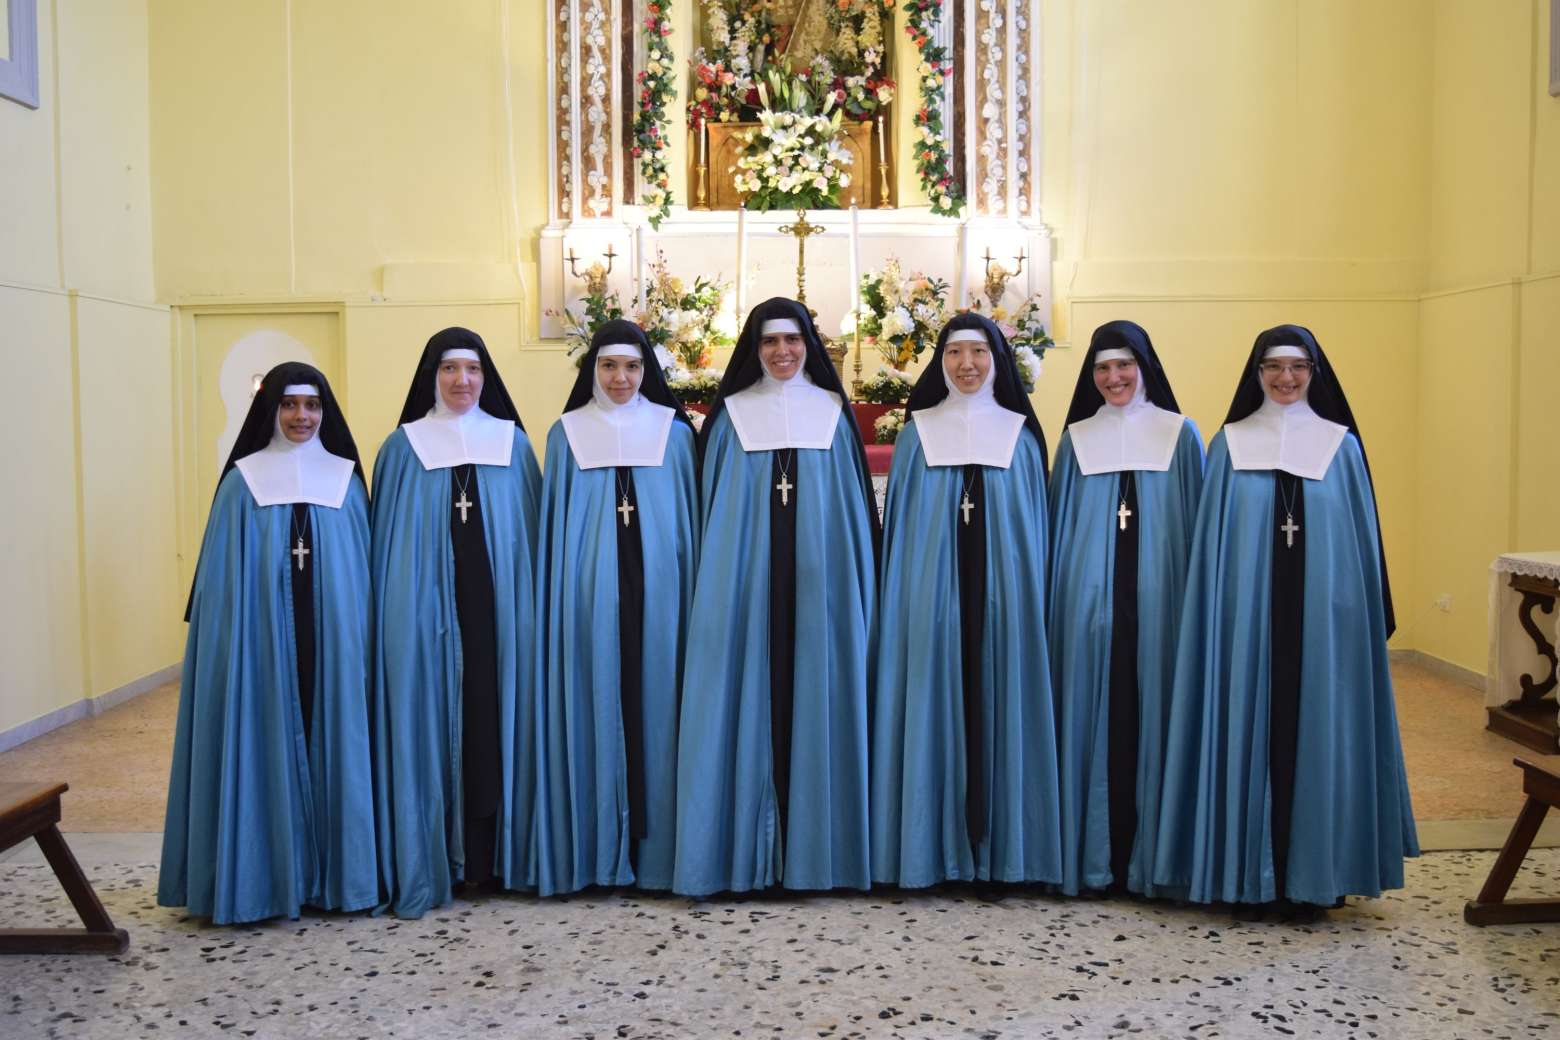 A Word from the Sister Adorers:  Newly Professed Sisters